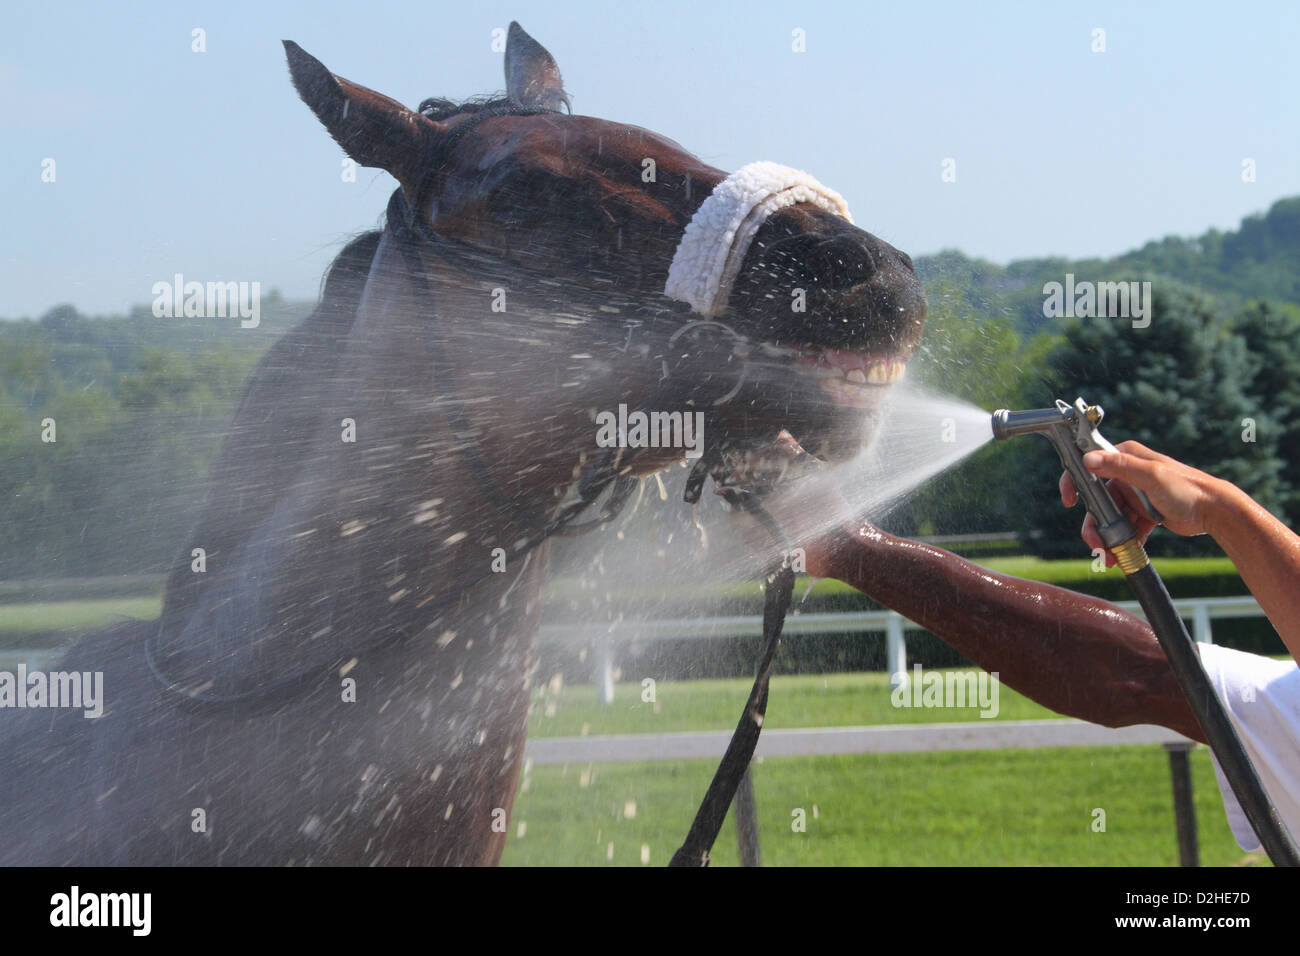 Water spray to cool down the racehorse after a race. Horse Racing at River Downs track, Cincinnati, Ohio, USA. Stock Photo